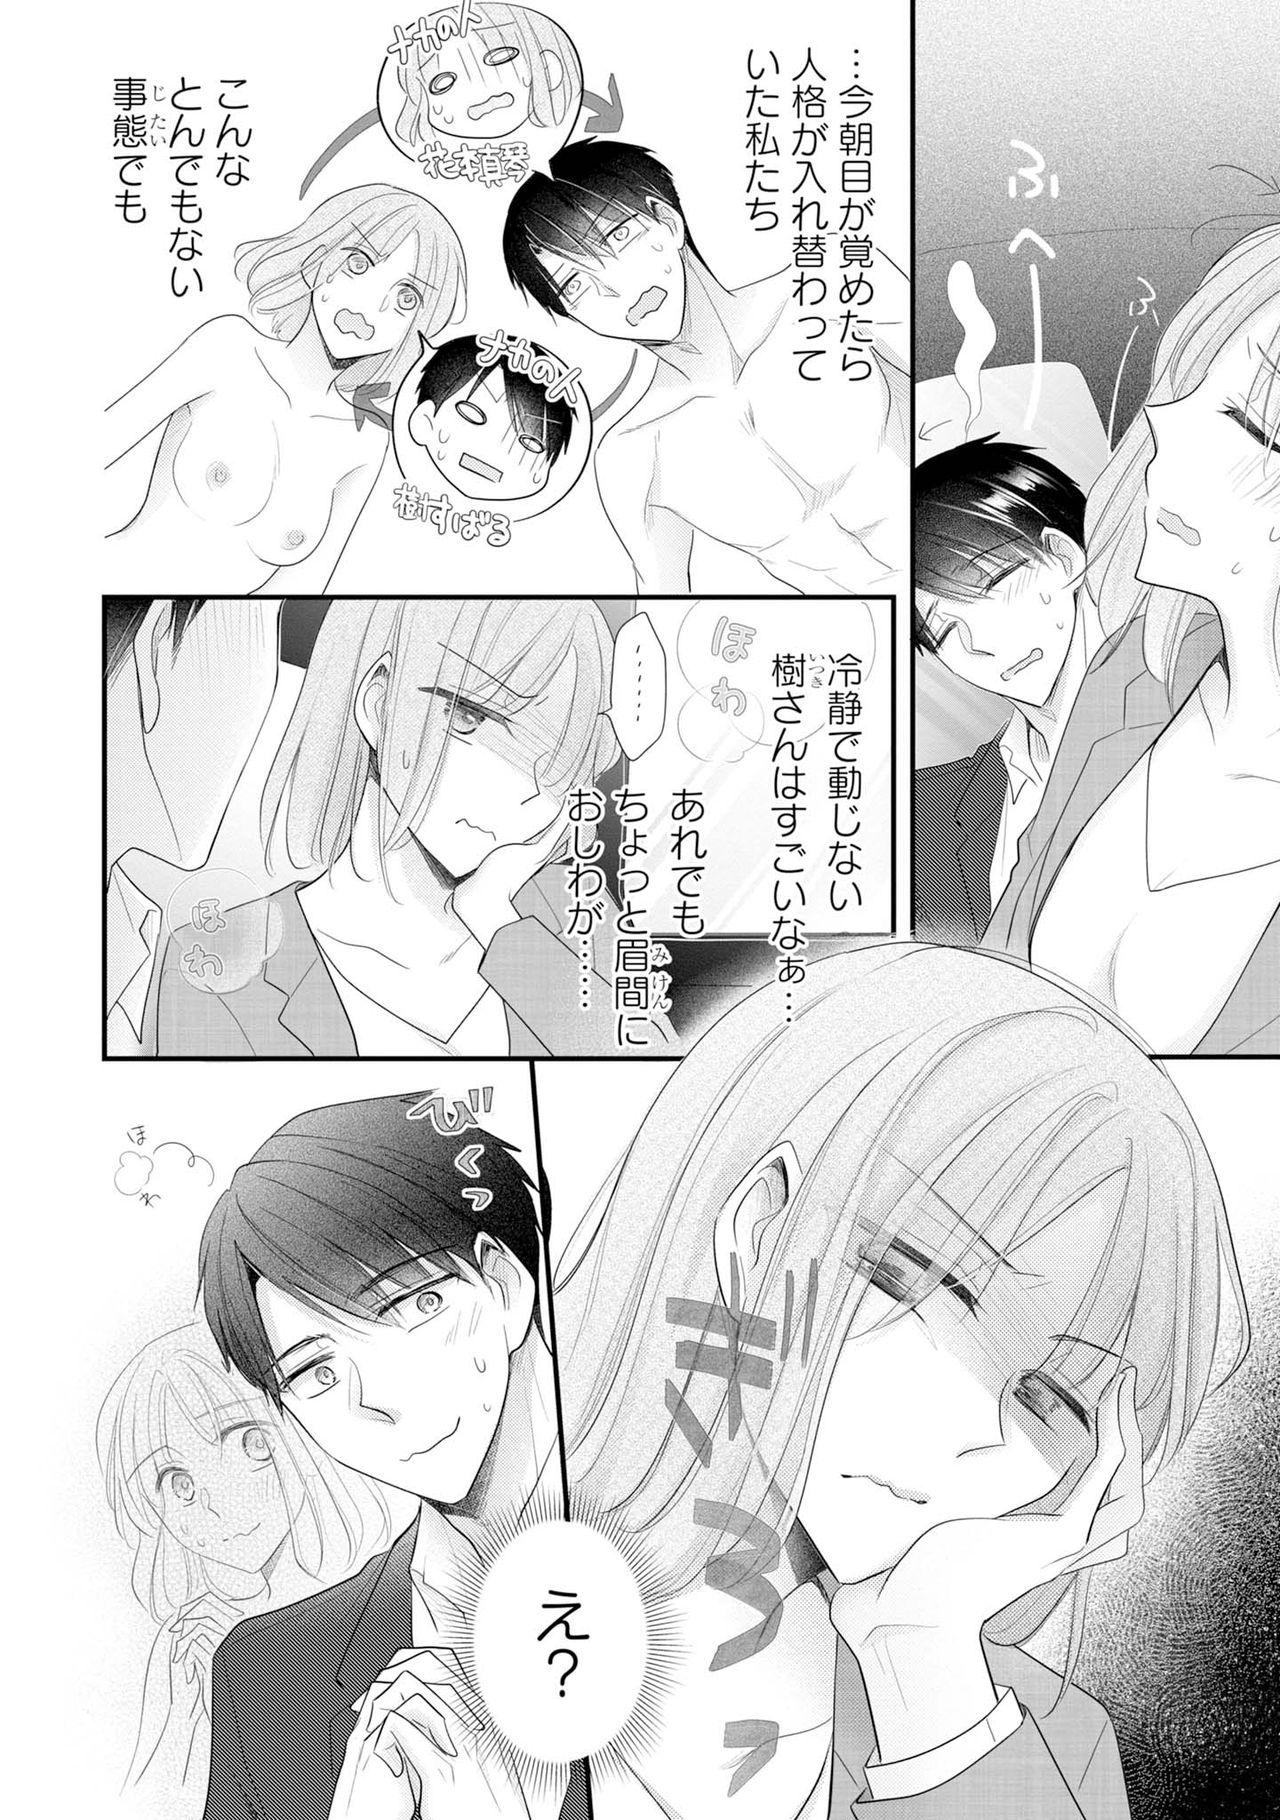 Gay Party 上司とエッチしたら挿れ替わっちゃった!?～彼が何度も入ってキちゃう…～ 第2-3話 Tributo - Page 4